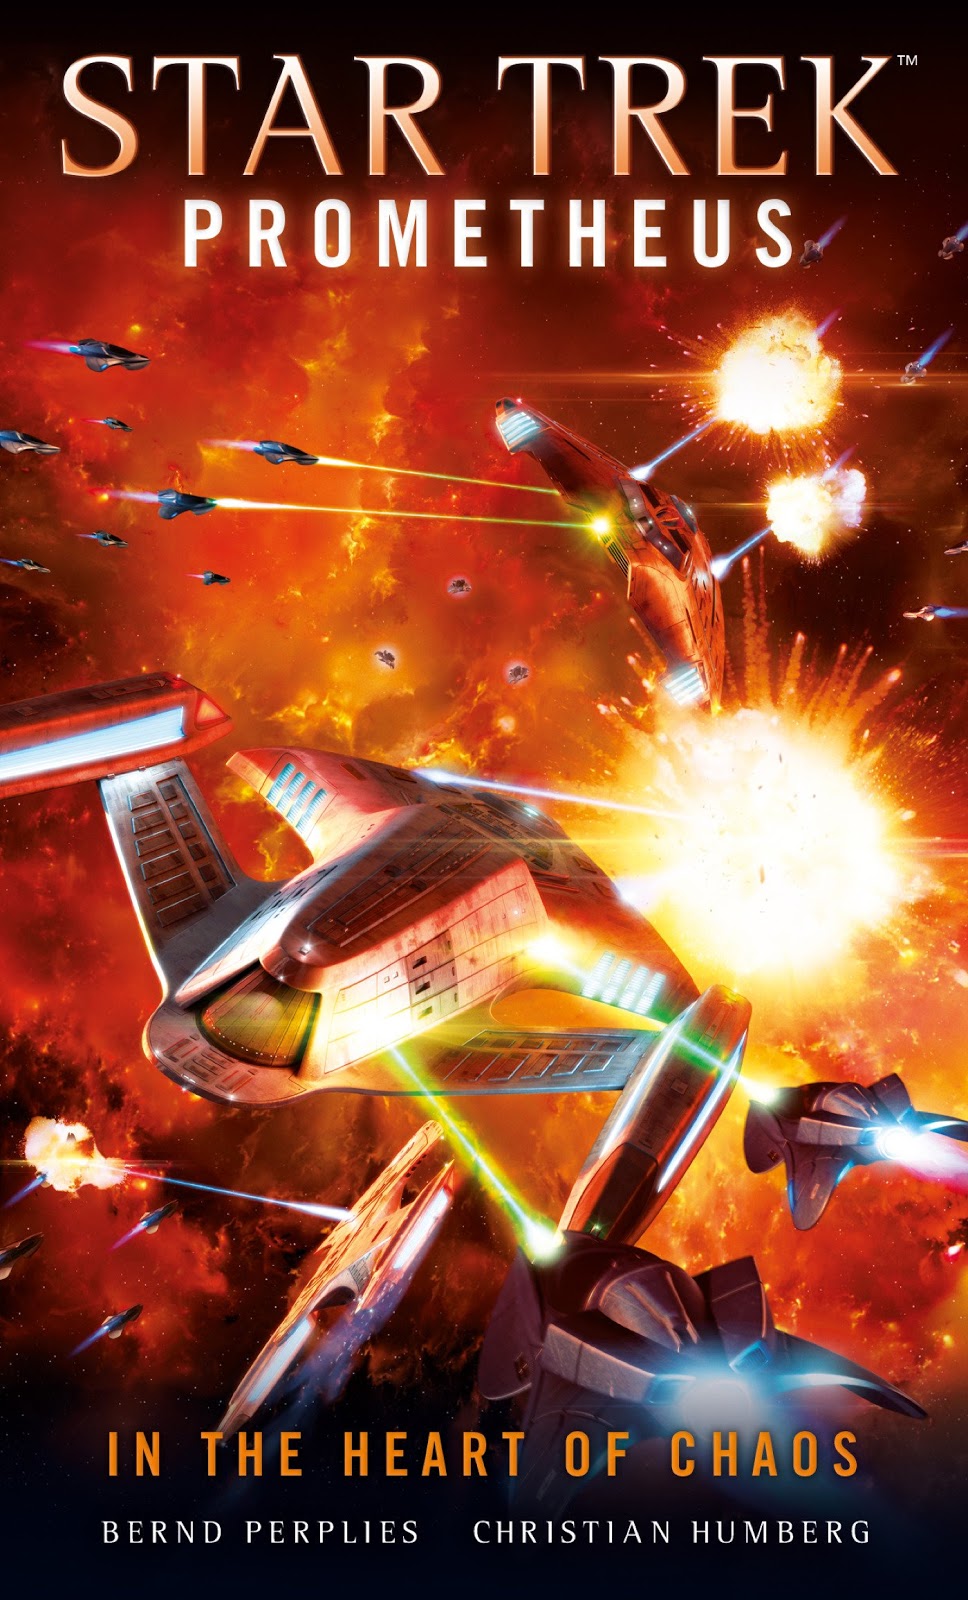 The Trek Collective Latest Star Trek novel covers and audiobook updates